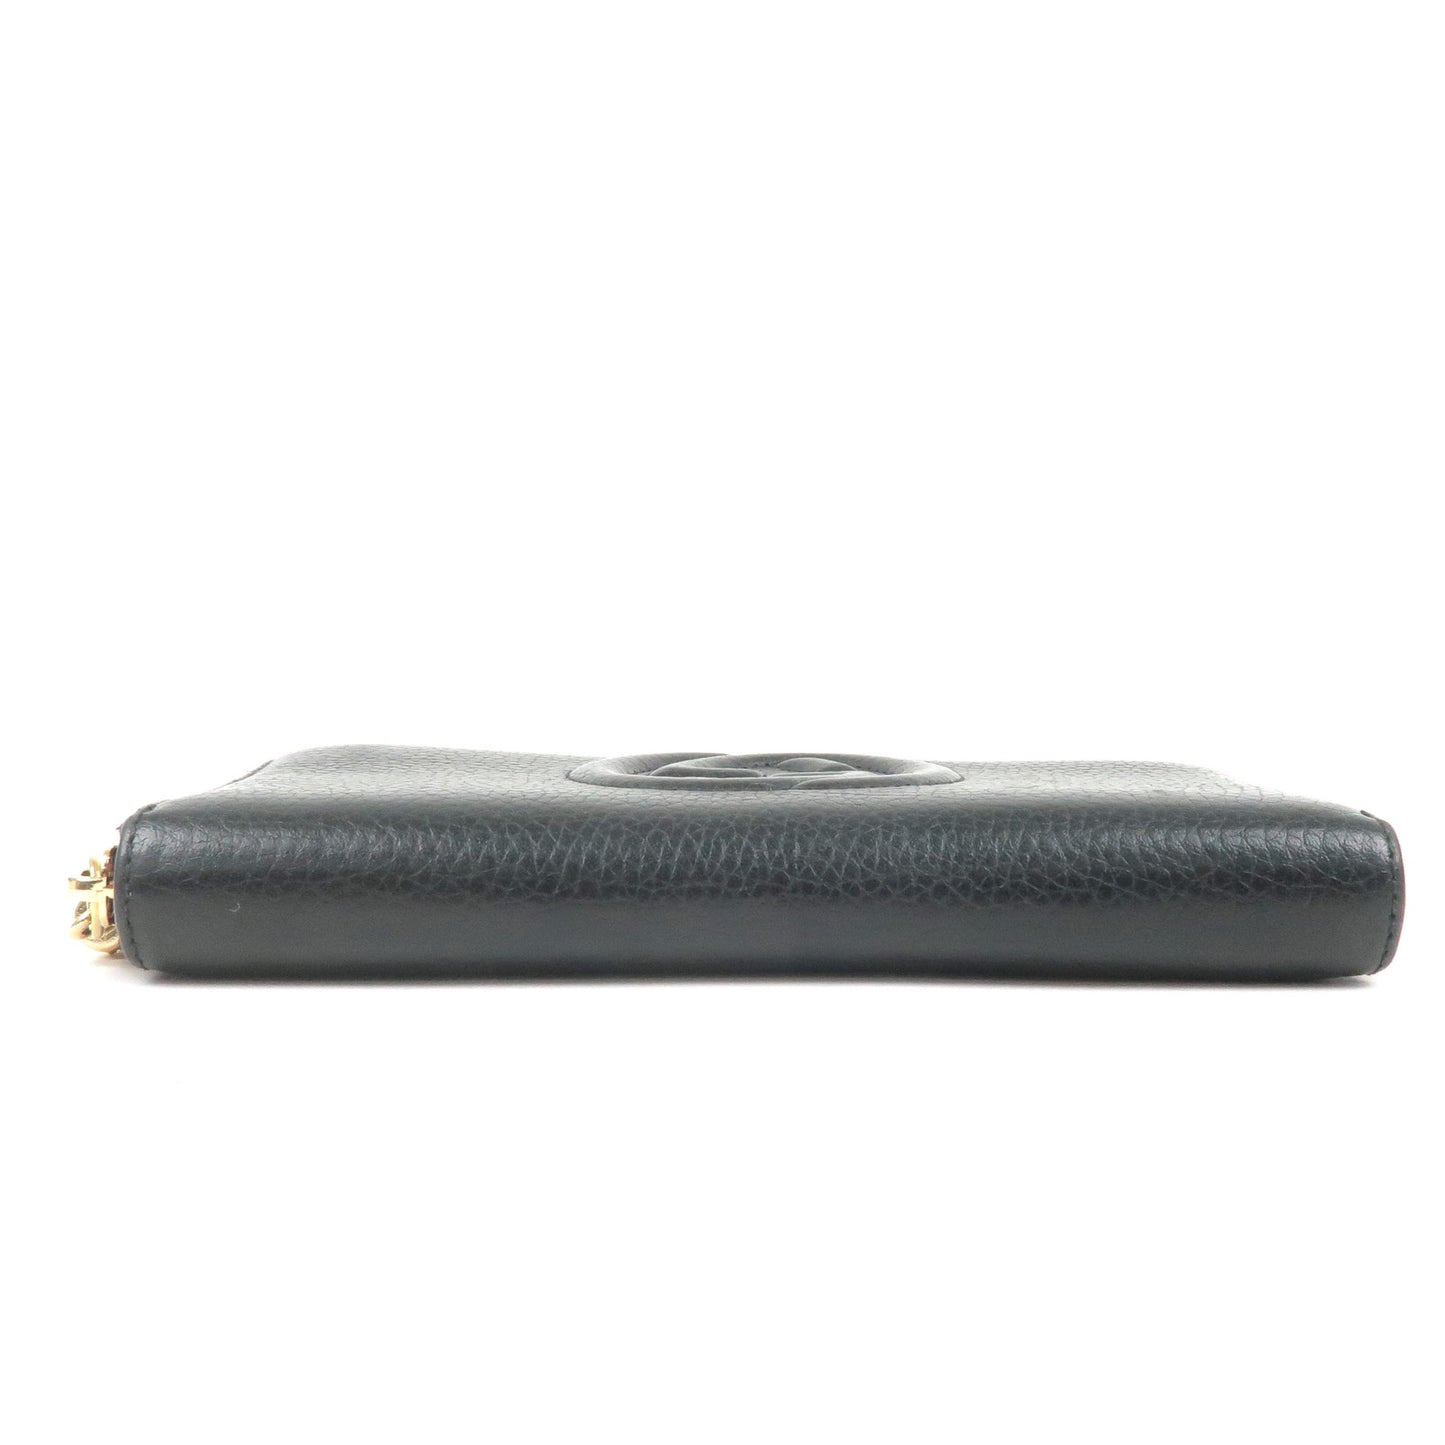 GUCCI SOHO Leather Round Zipper Long Wallet Black 598187